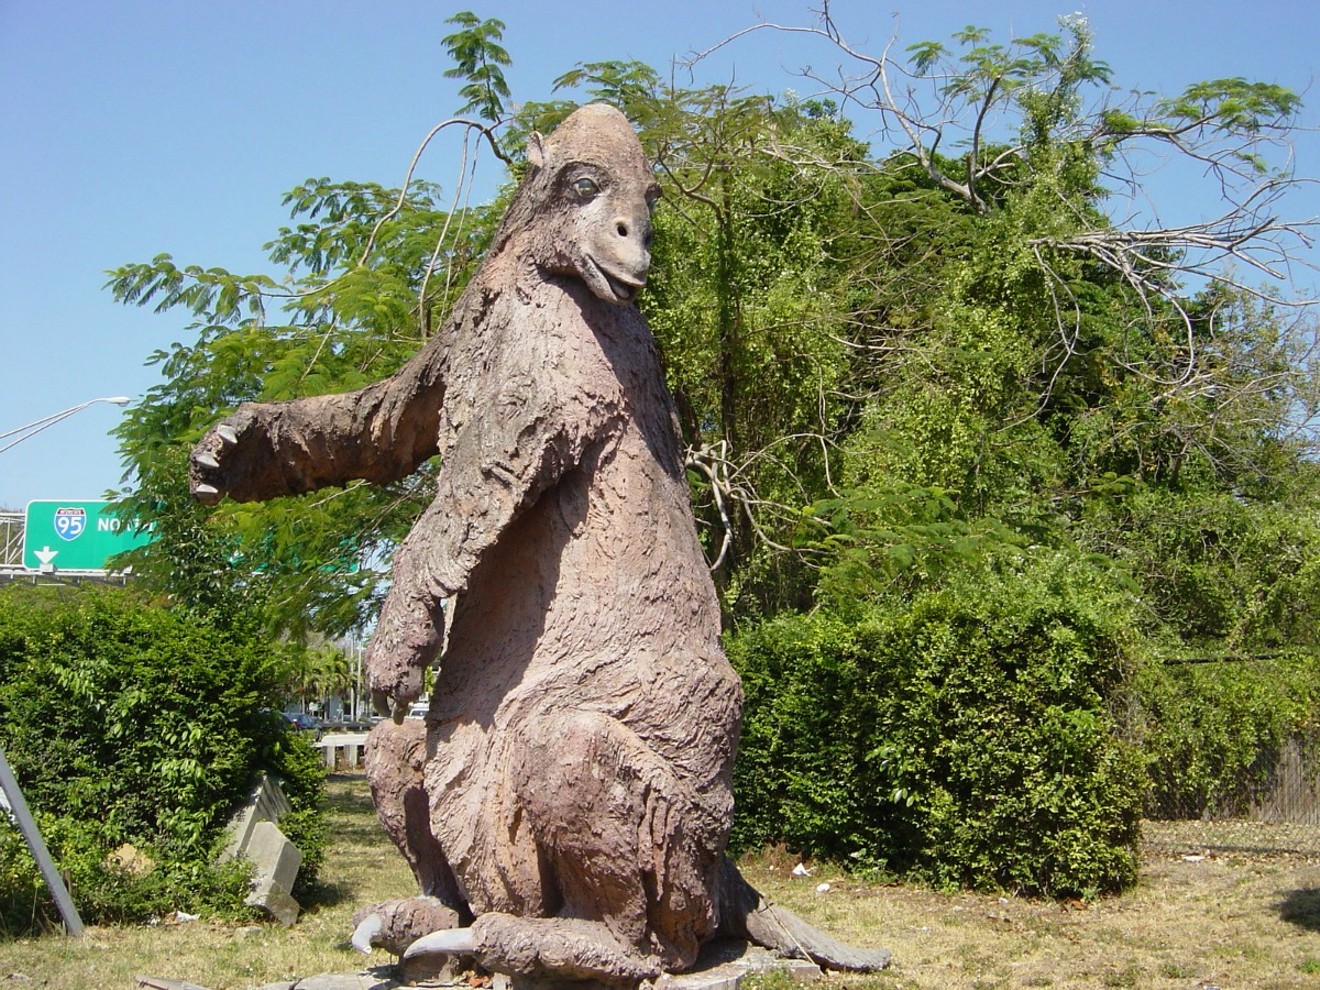 The sloth statue has stood beside U.S. 1 for decades.